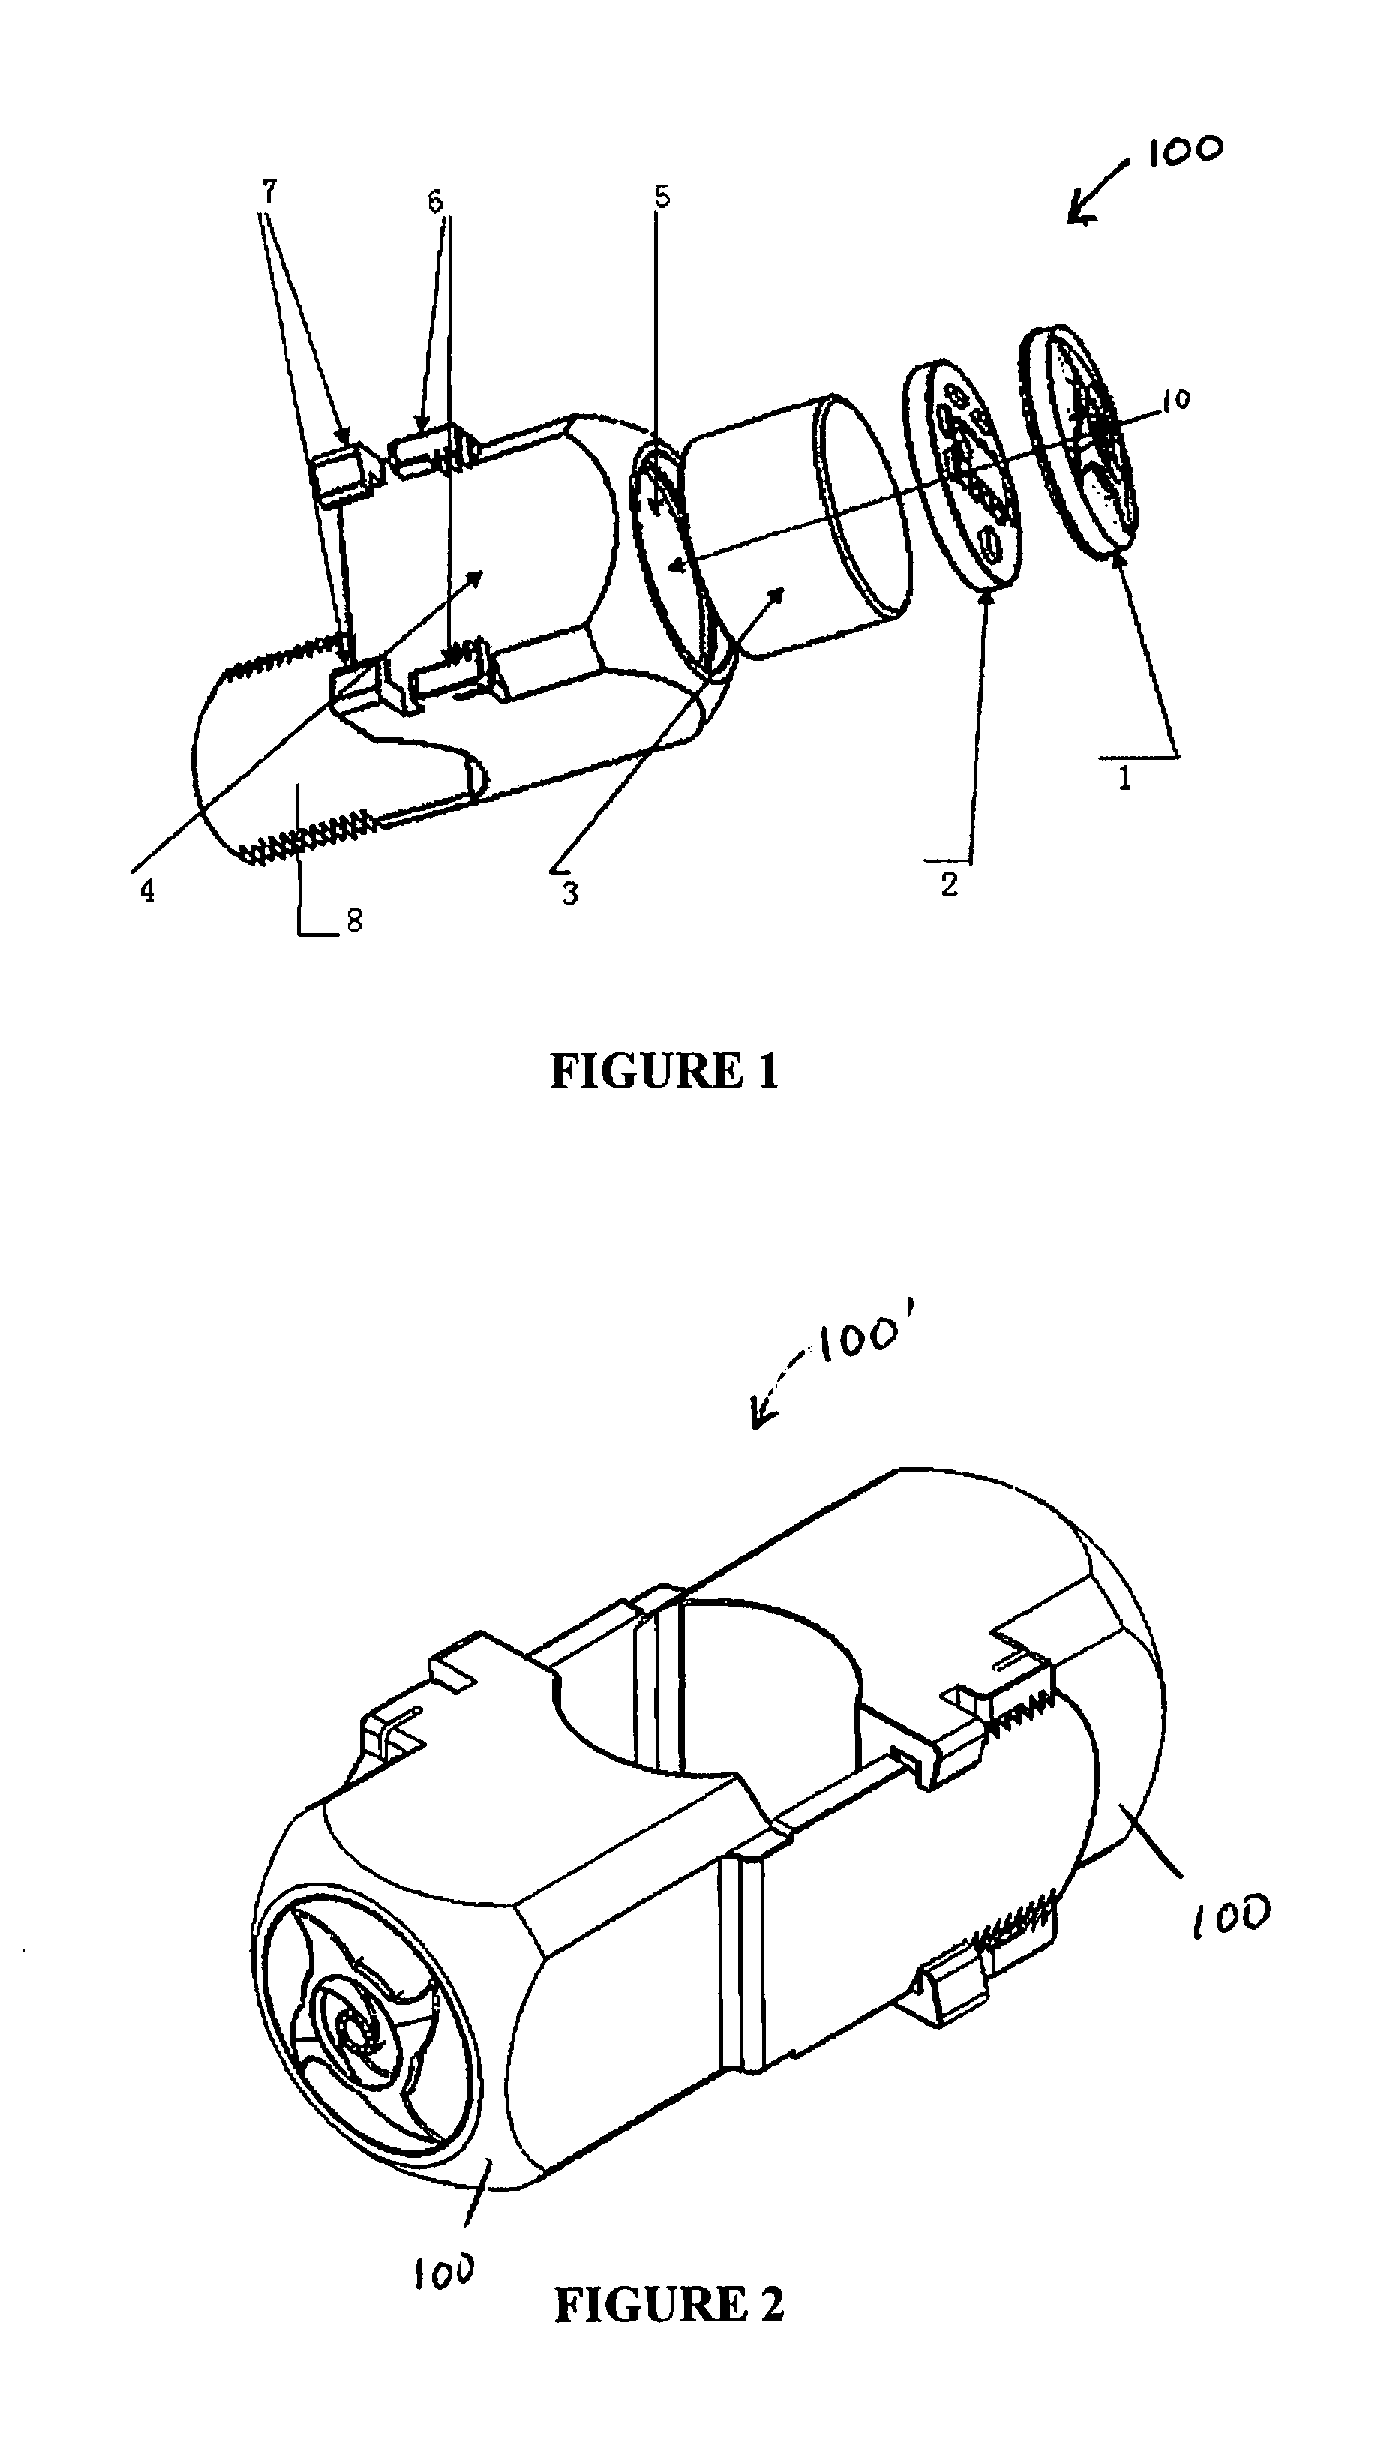 Magnetic Platinum Catalyst and Method of Making and its Application as an Engine Fuel Enhancer